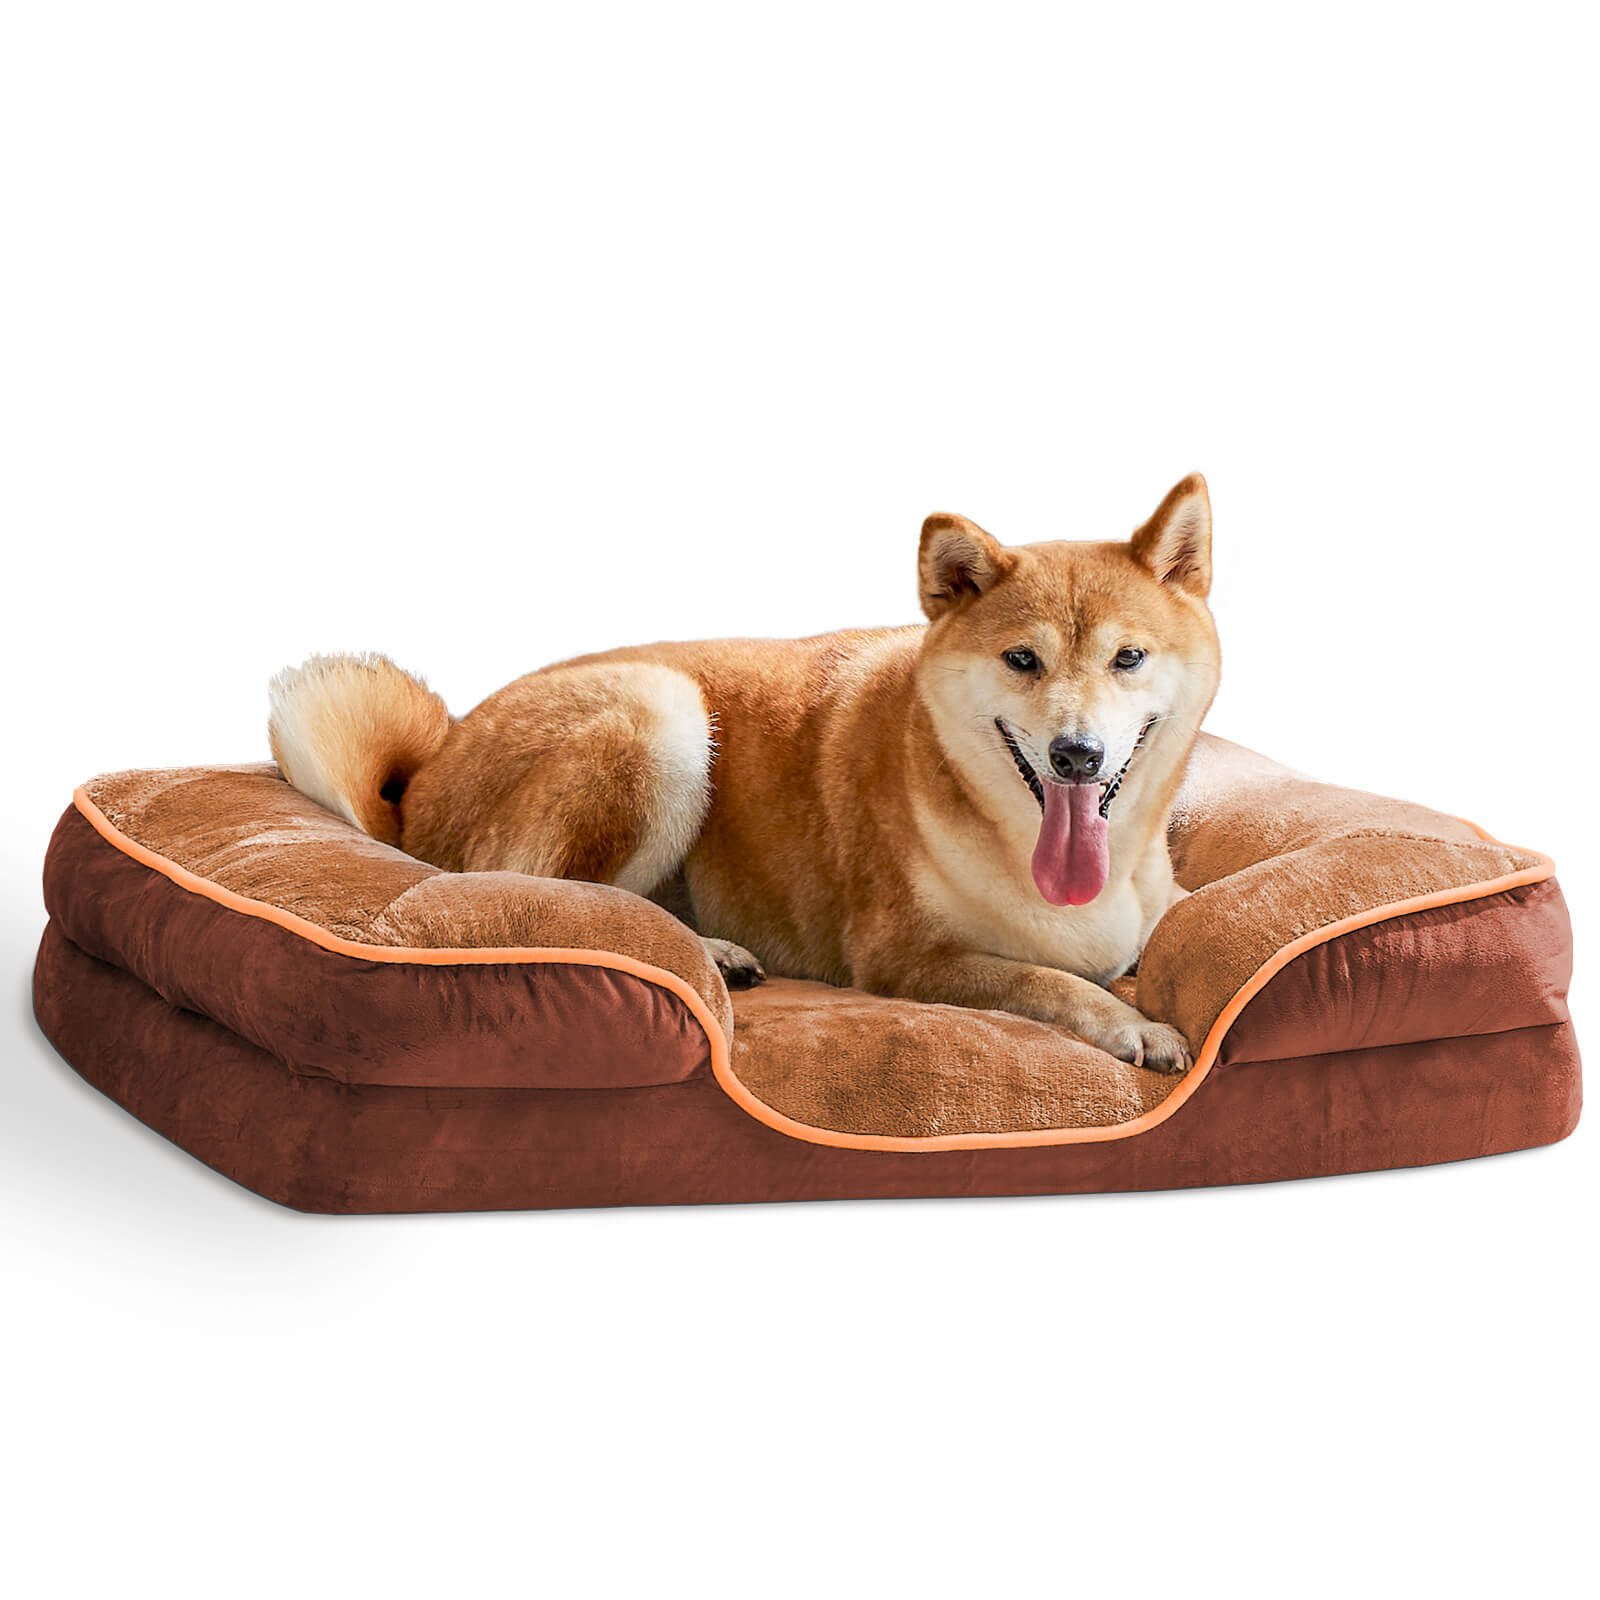 Rectangular dog bed, machine washable sleeper sofa with non-slip bottom Breathable and soft puppy bed for large, medium and small dogs